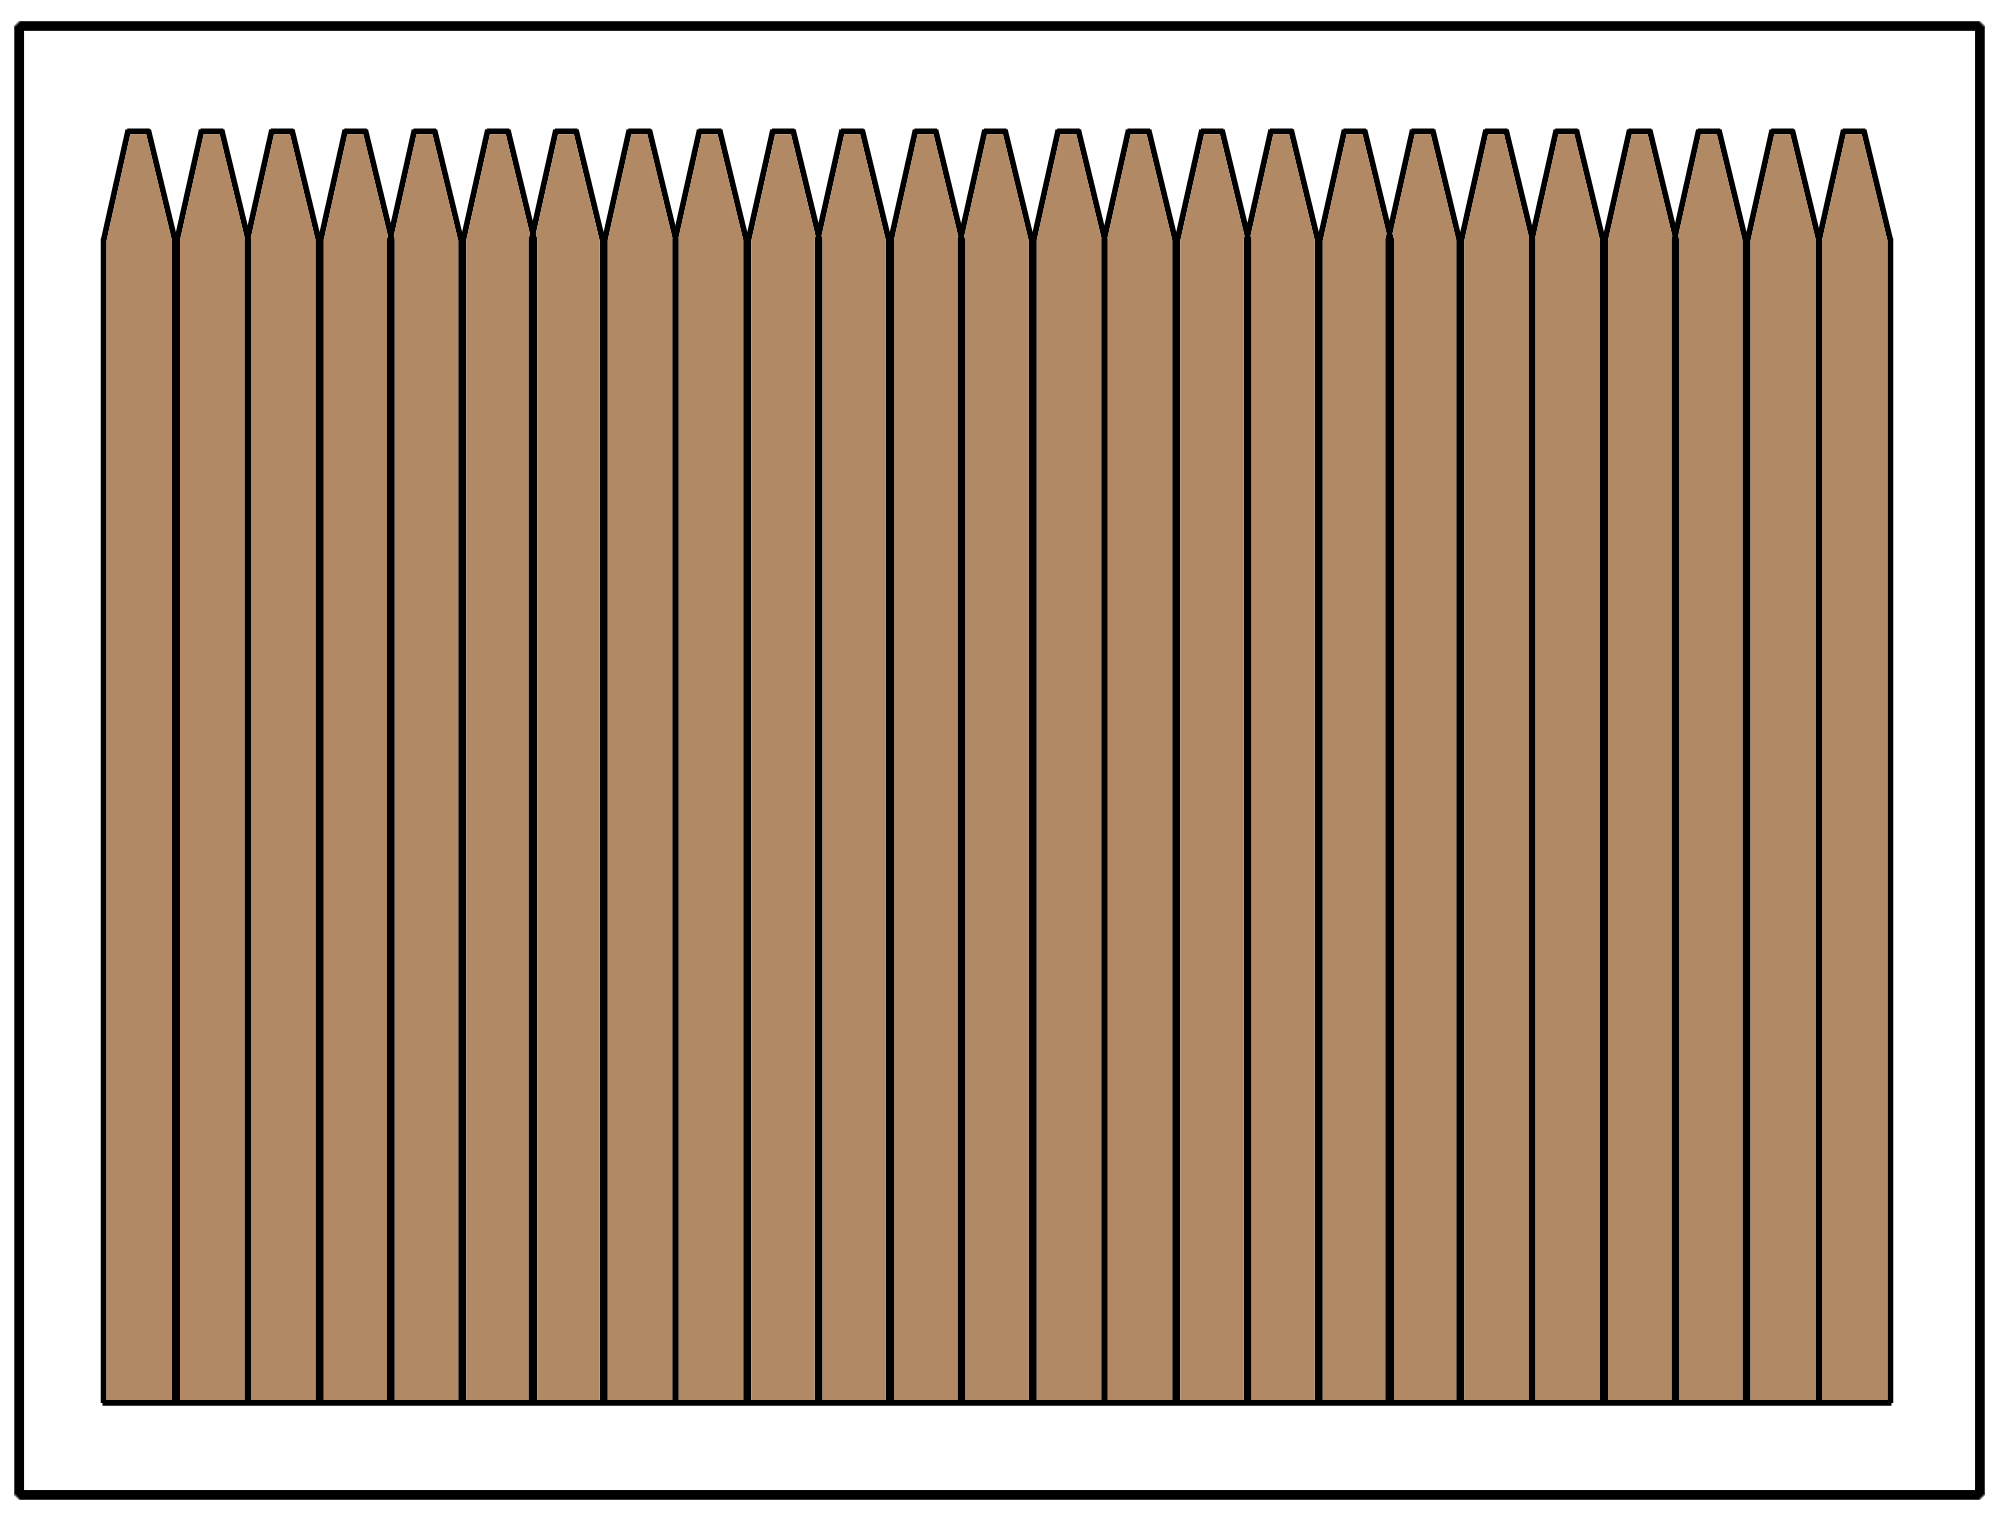 Illustration of a privacy fence using a thin picket, also referred to as a stockade style fence